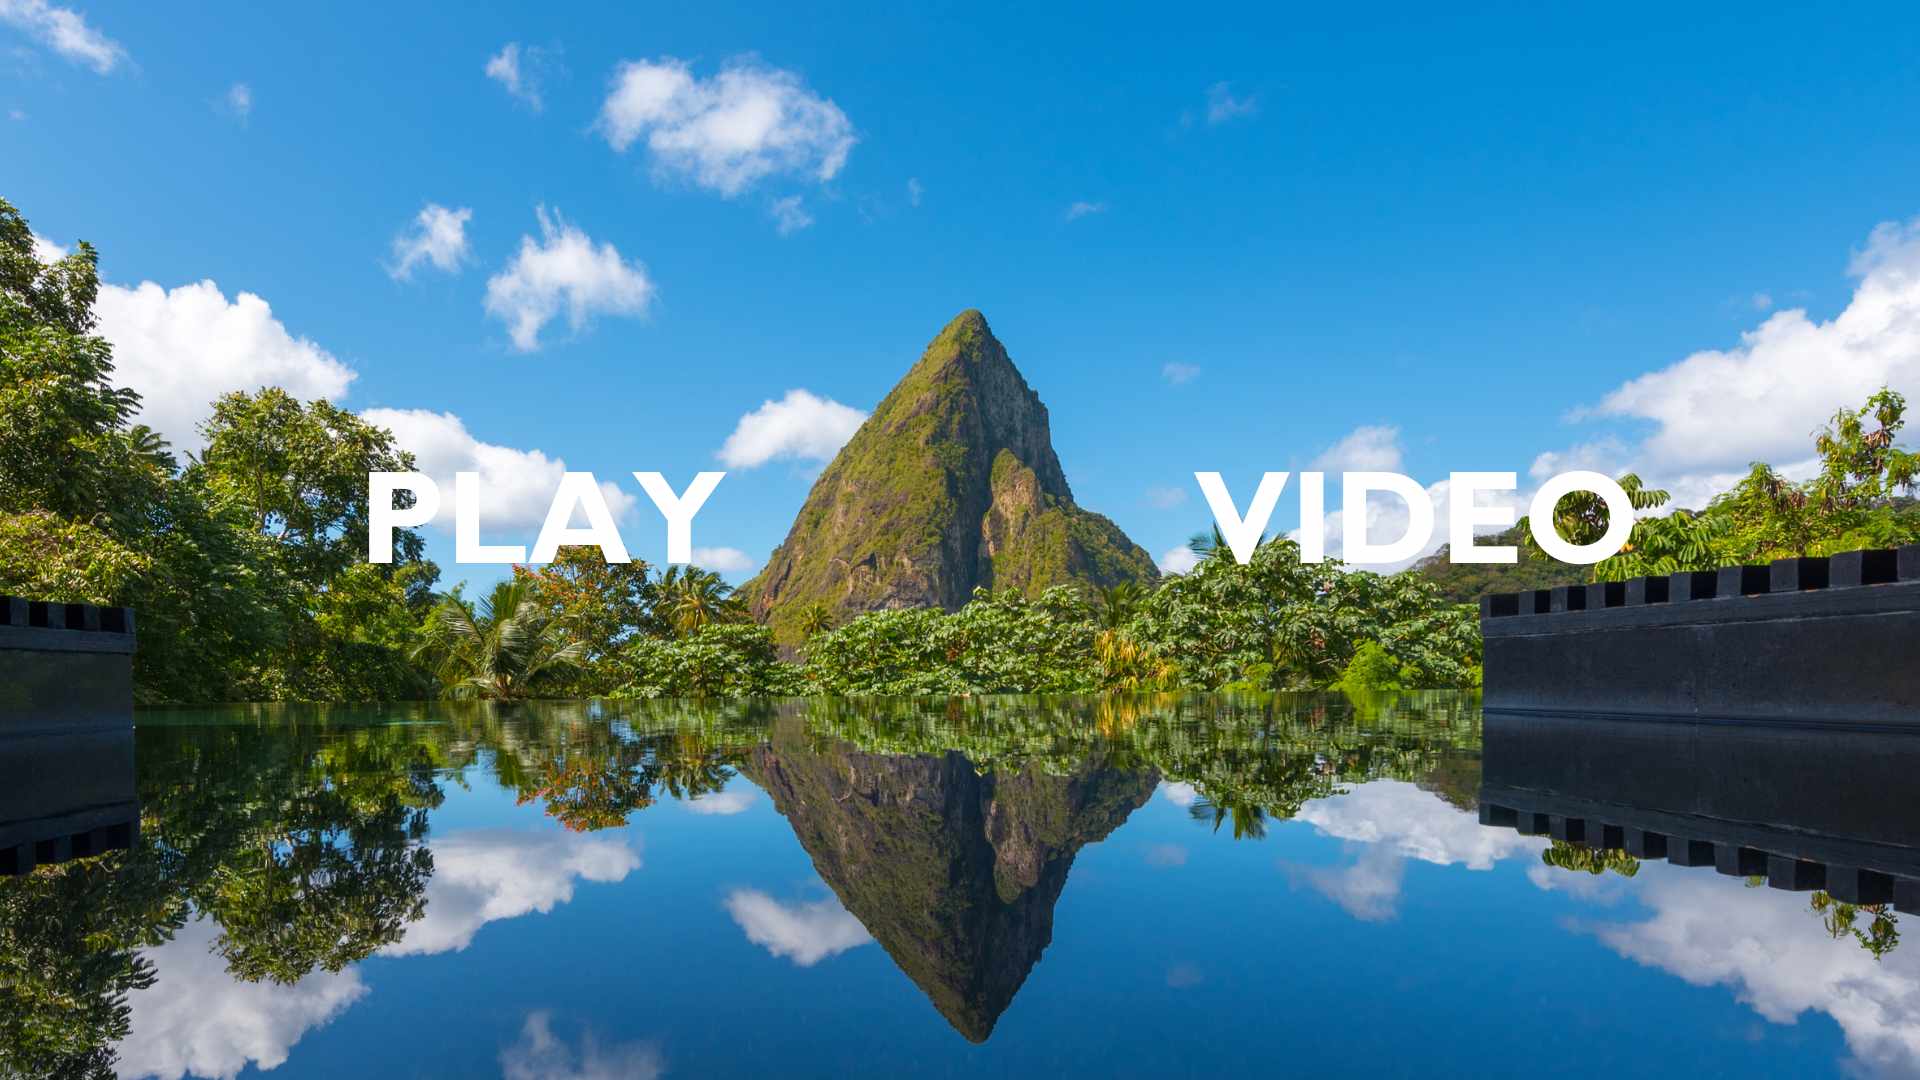 Load video: Video introducing the Rabot Hotel in Saint Lucia. Tour following a woman around the tropical hotel.